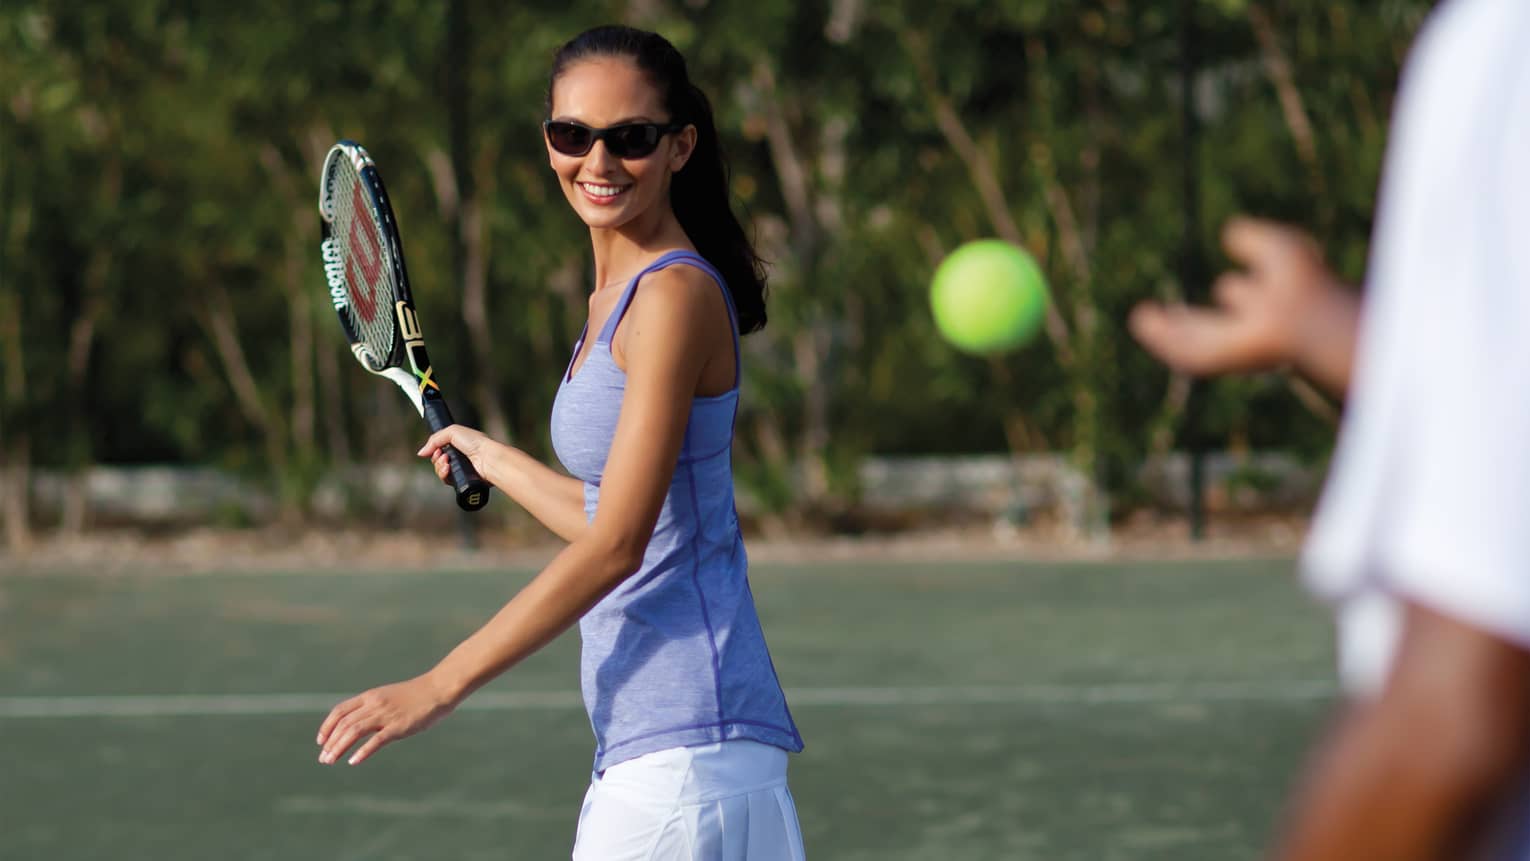 Woman in sunglasses and swings tennis racket as tennis ball approaches